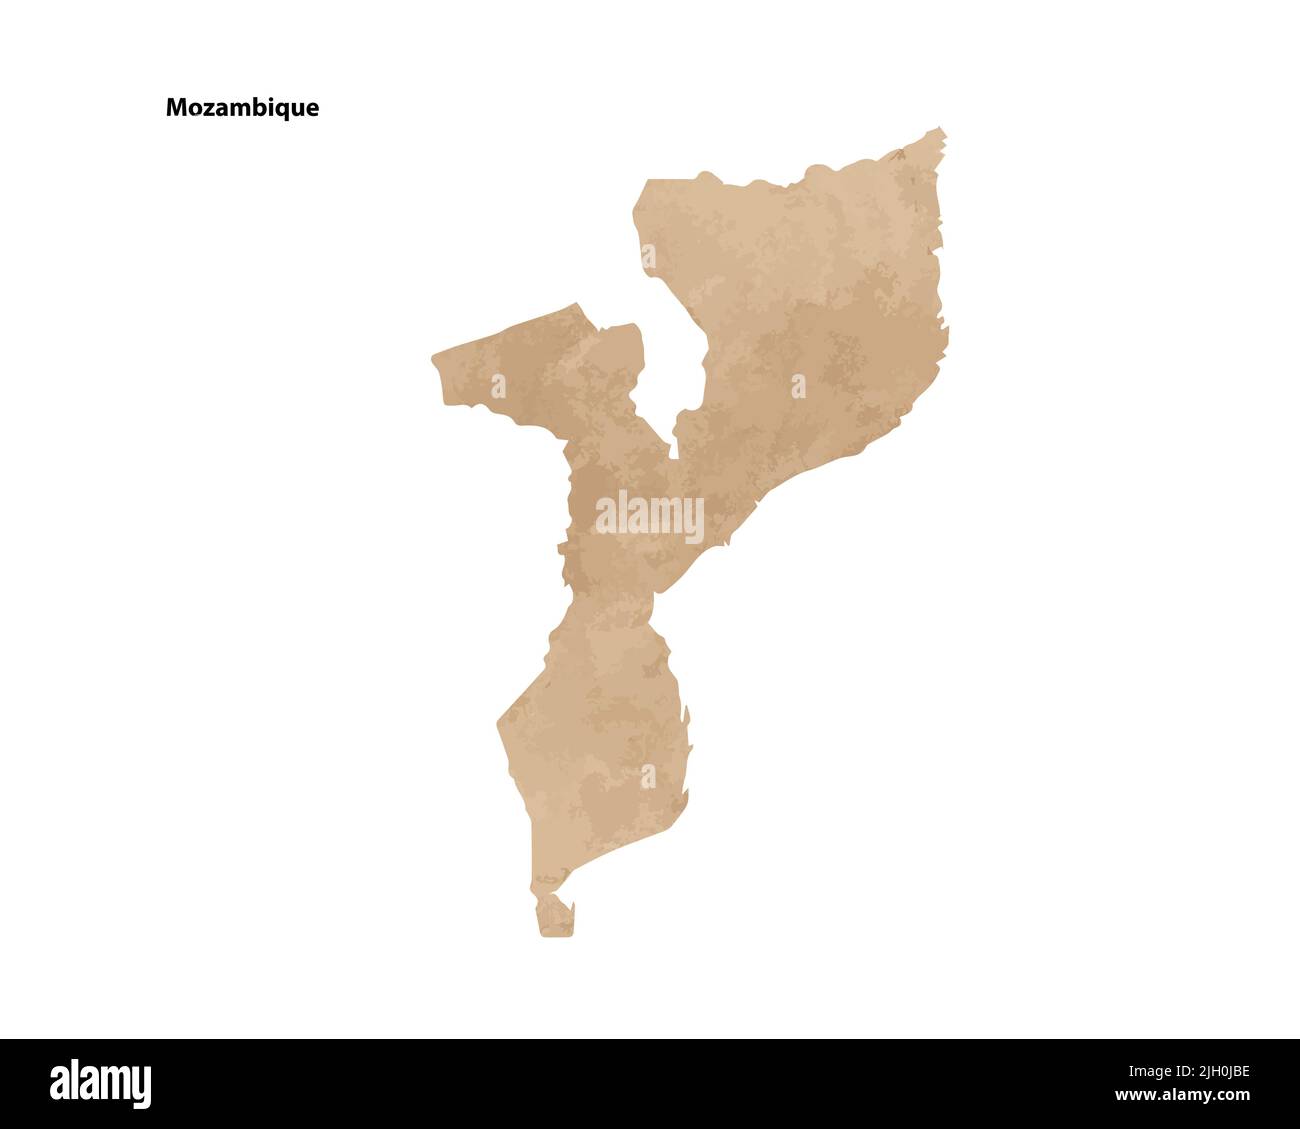 Old vintage paper textured map of Mozambique Country - Vector illustration Stock Vector